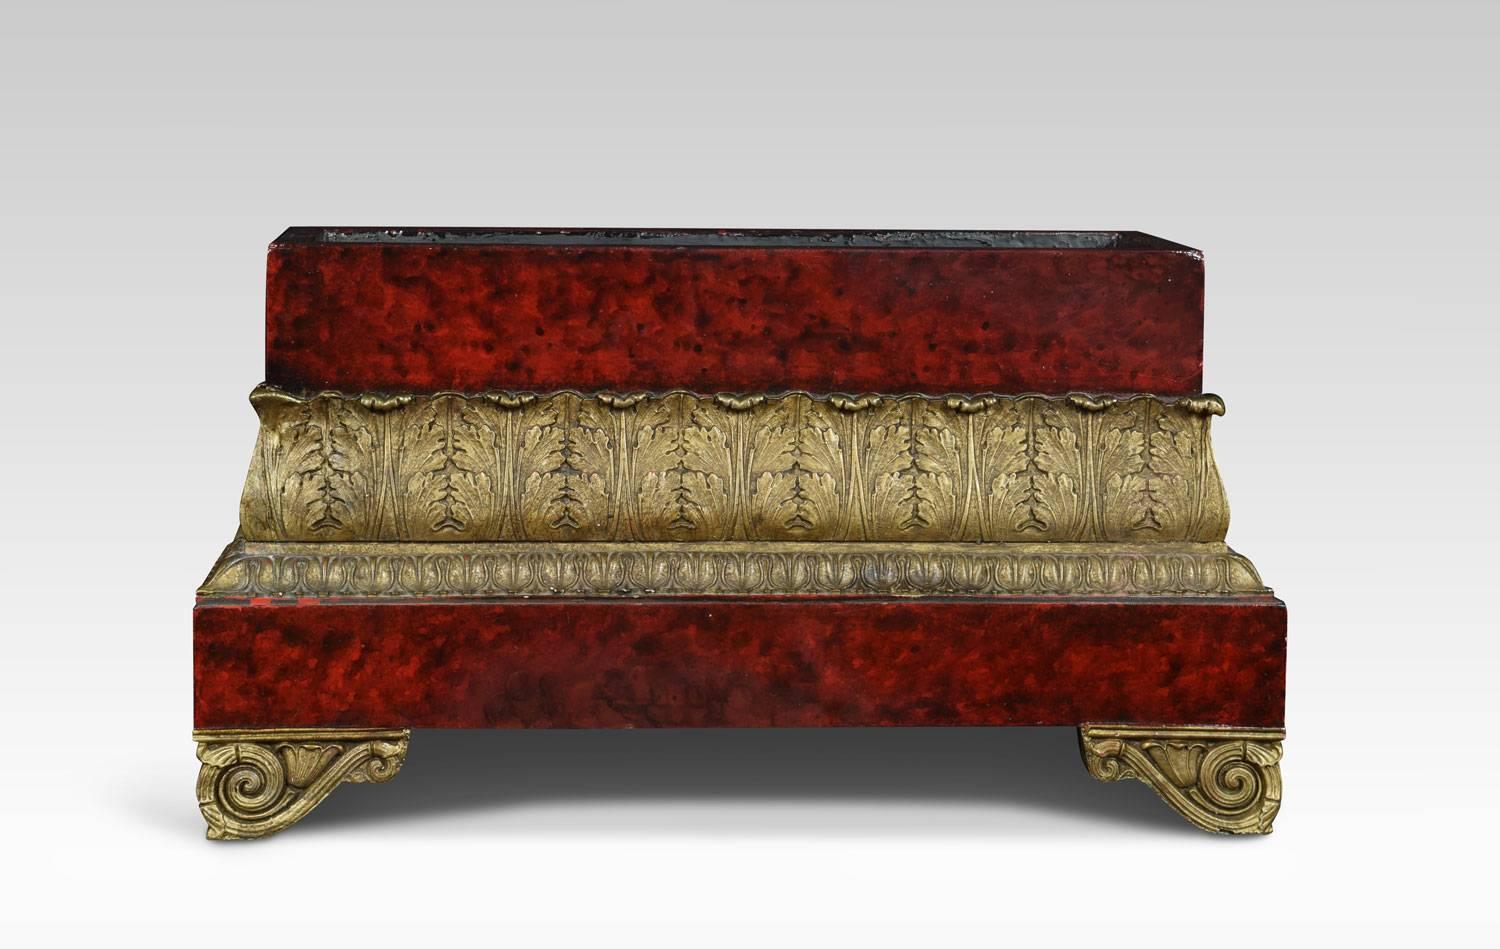 Regency style faux tortoiseshell jardinière of rectangular form having foliated gilded border. All raised up on scrolling feet.
Dimensions:
Height 9.5 inches
Width 16.5 inches
Depth 7 inches.